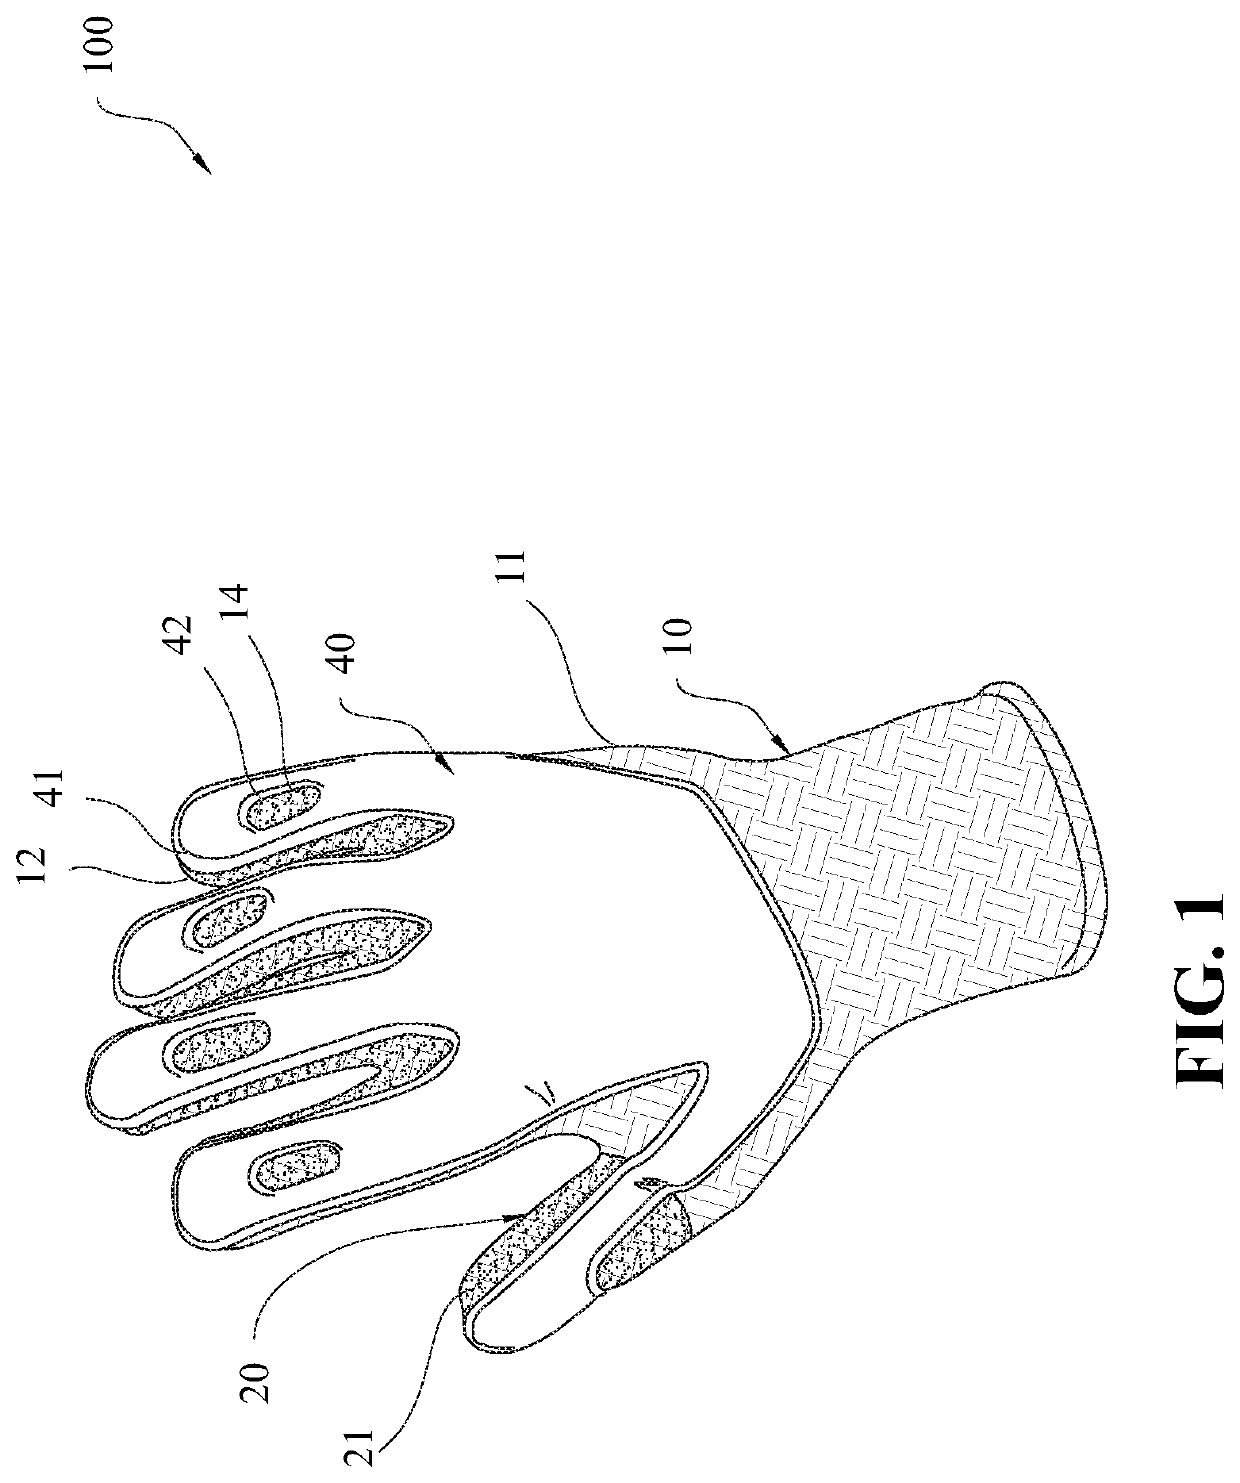 Athletic Glove Strengthened by Applying a Coating Layer